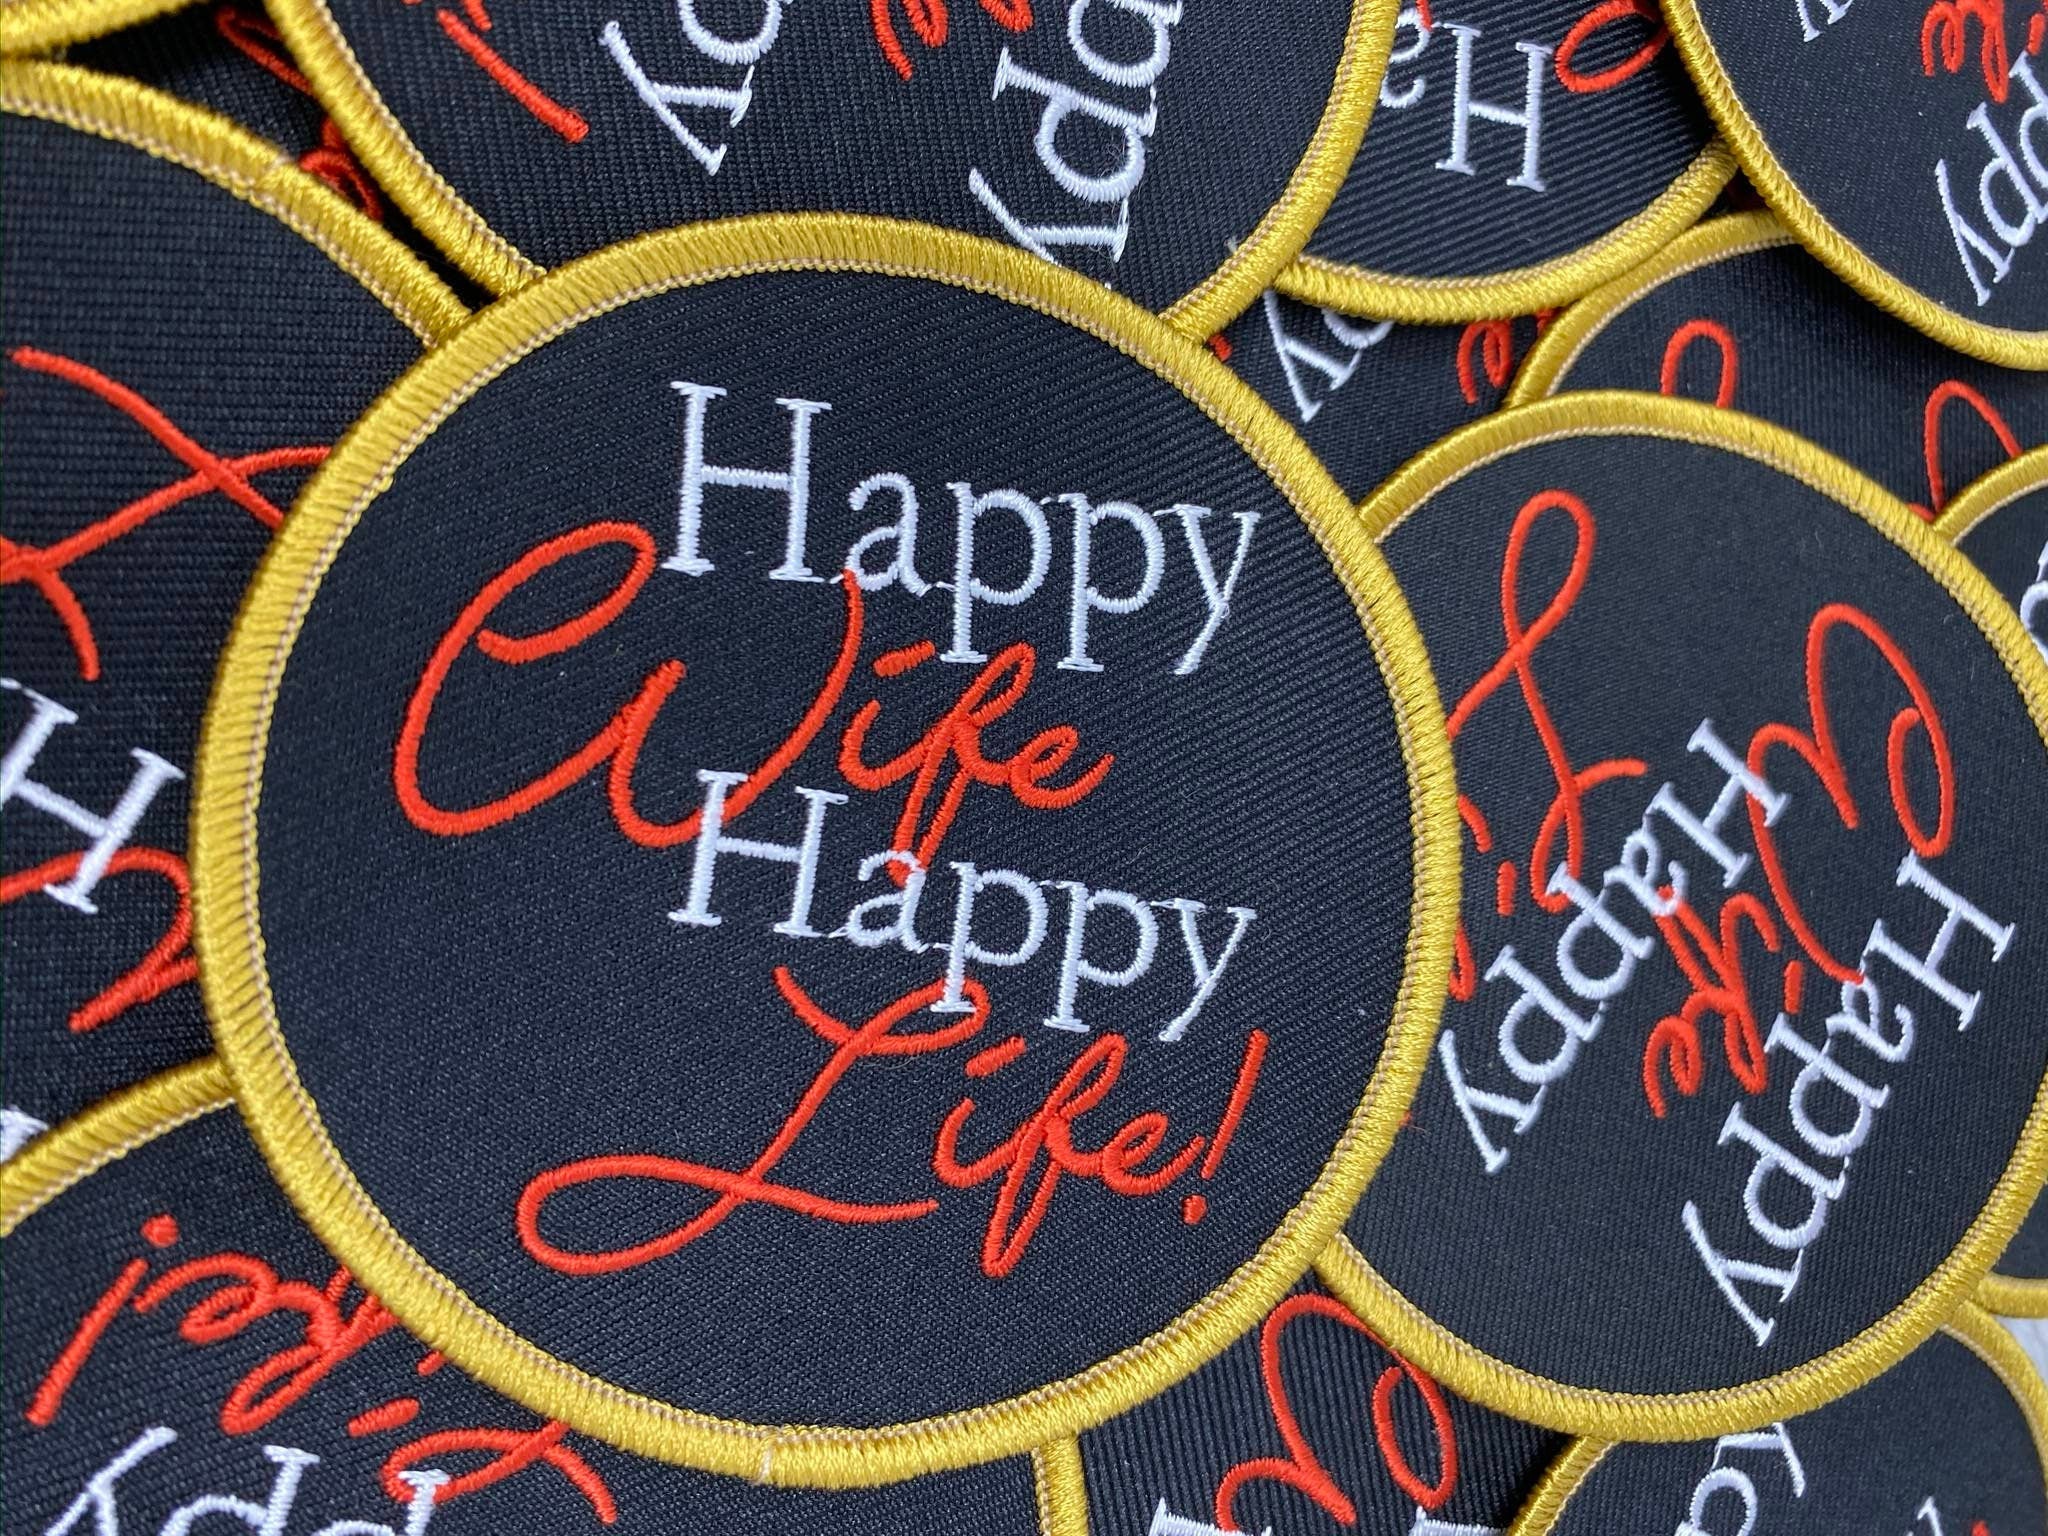 NEW Arrival,"Happy Wife, Happy Life" 3" Circular Badge, Iron on Embroidered Patch, Positive Applique, Cool Patch for Clothing, Bridal Gifts